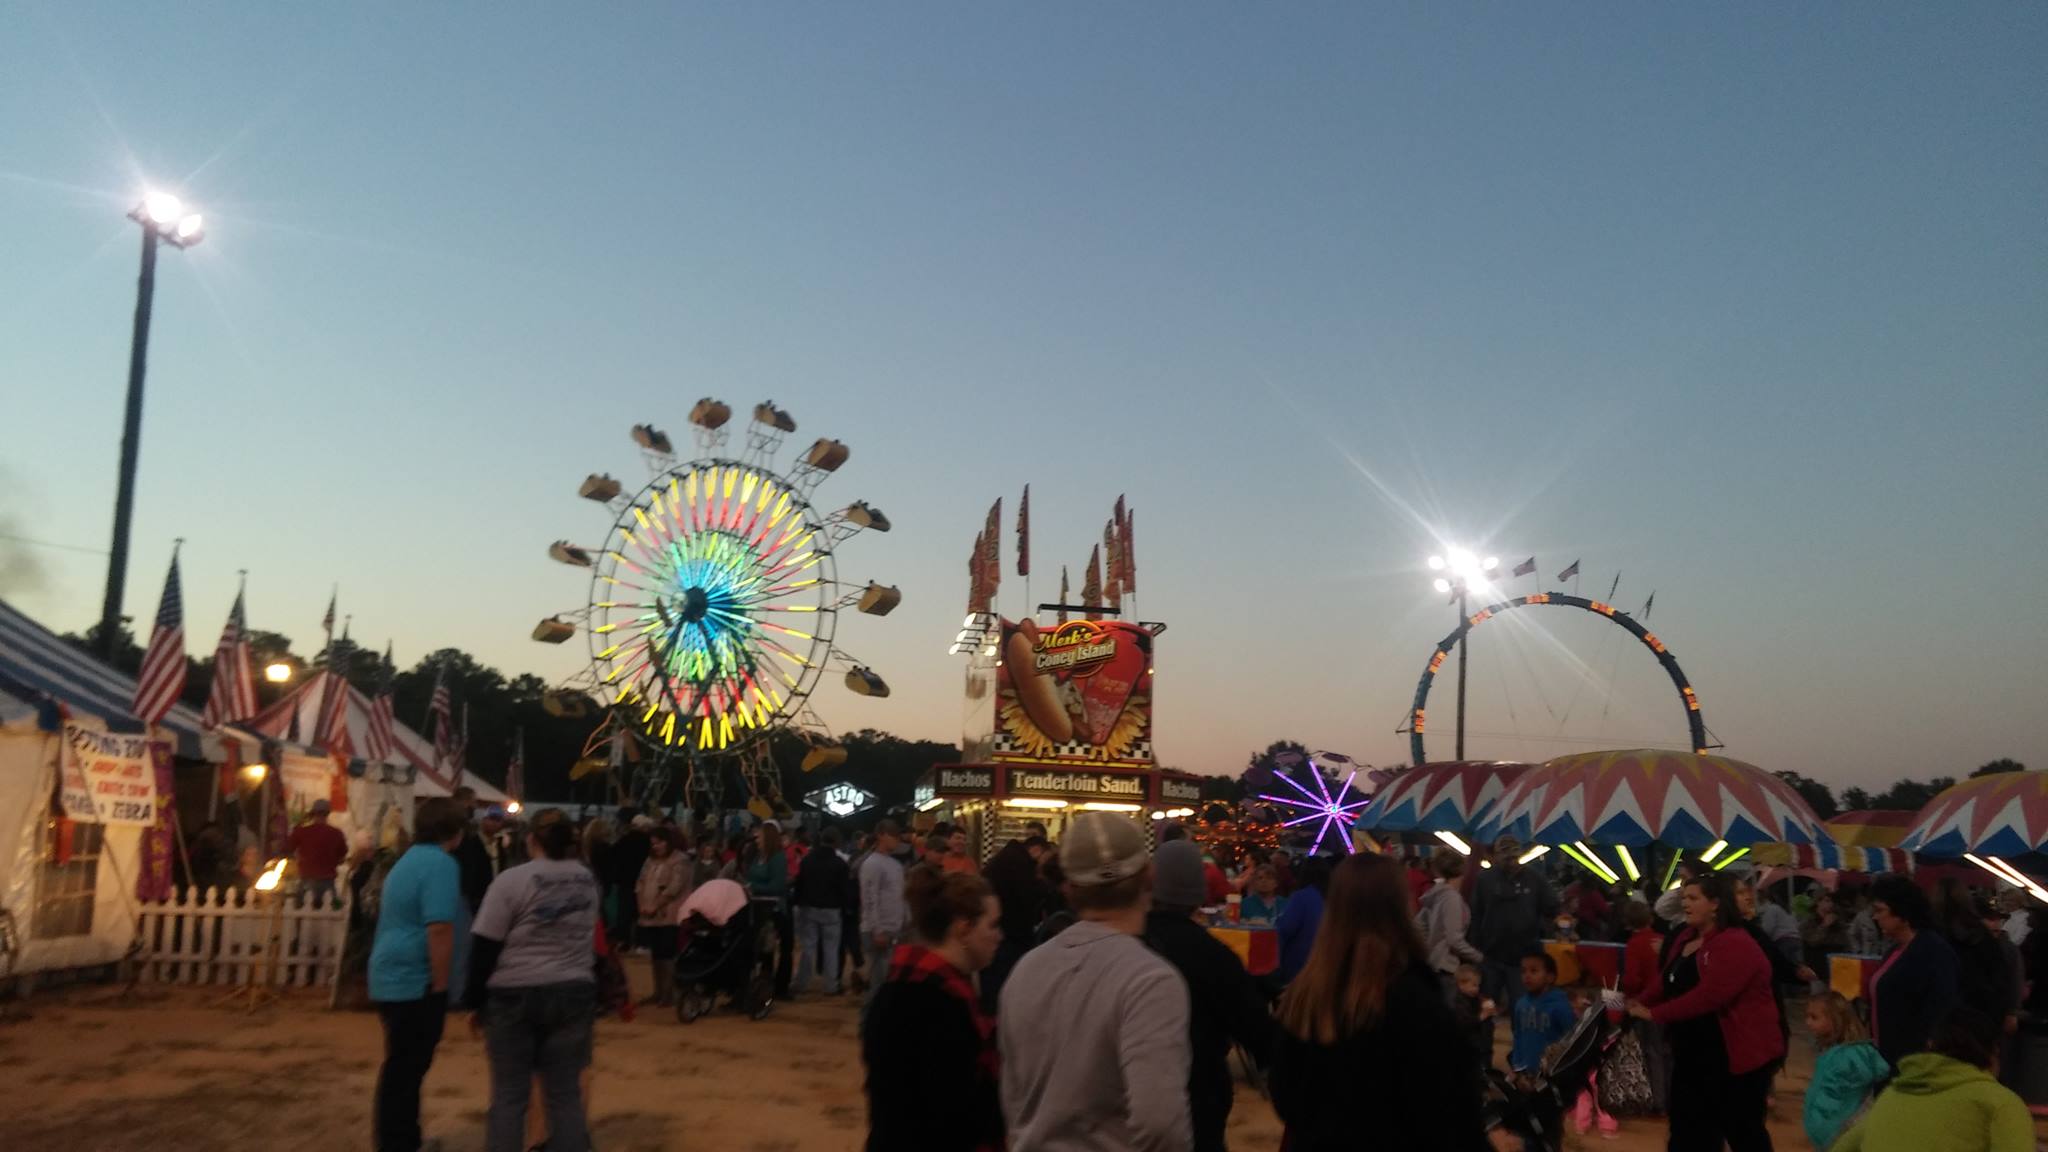 You are currently viewing Videos from the 2015 Fair